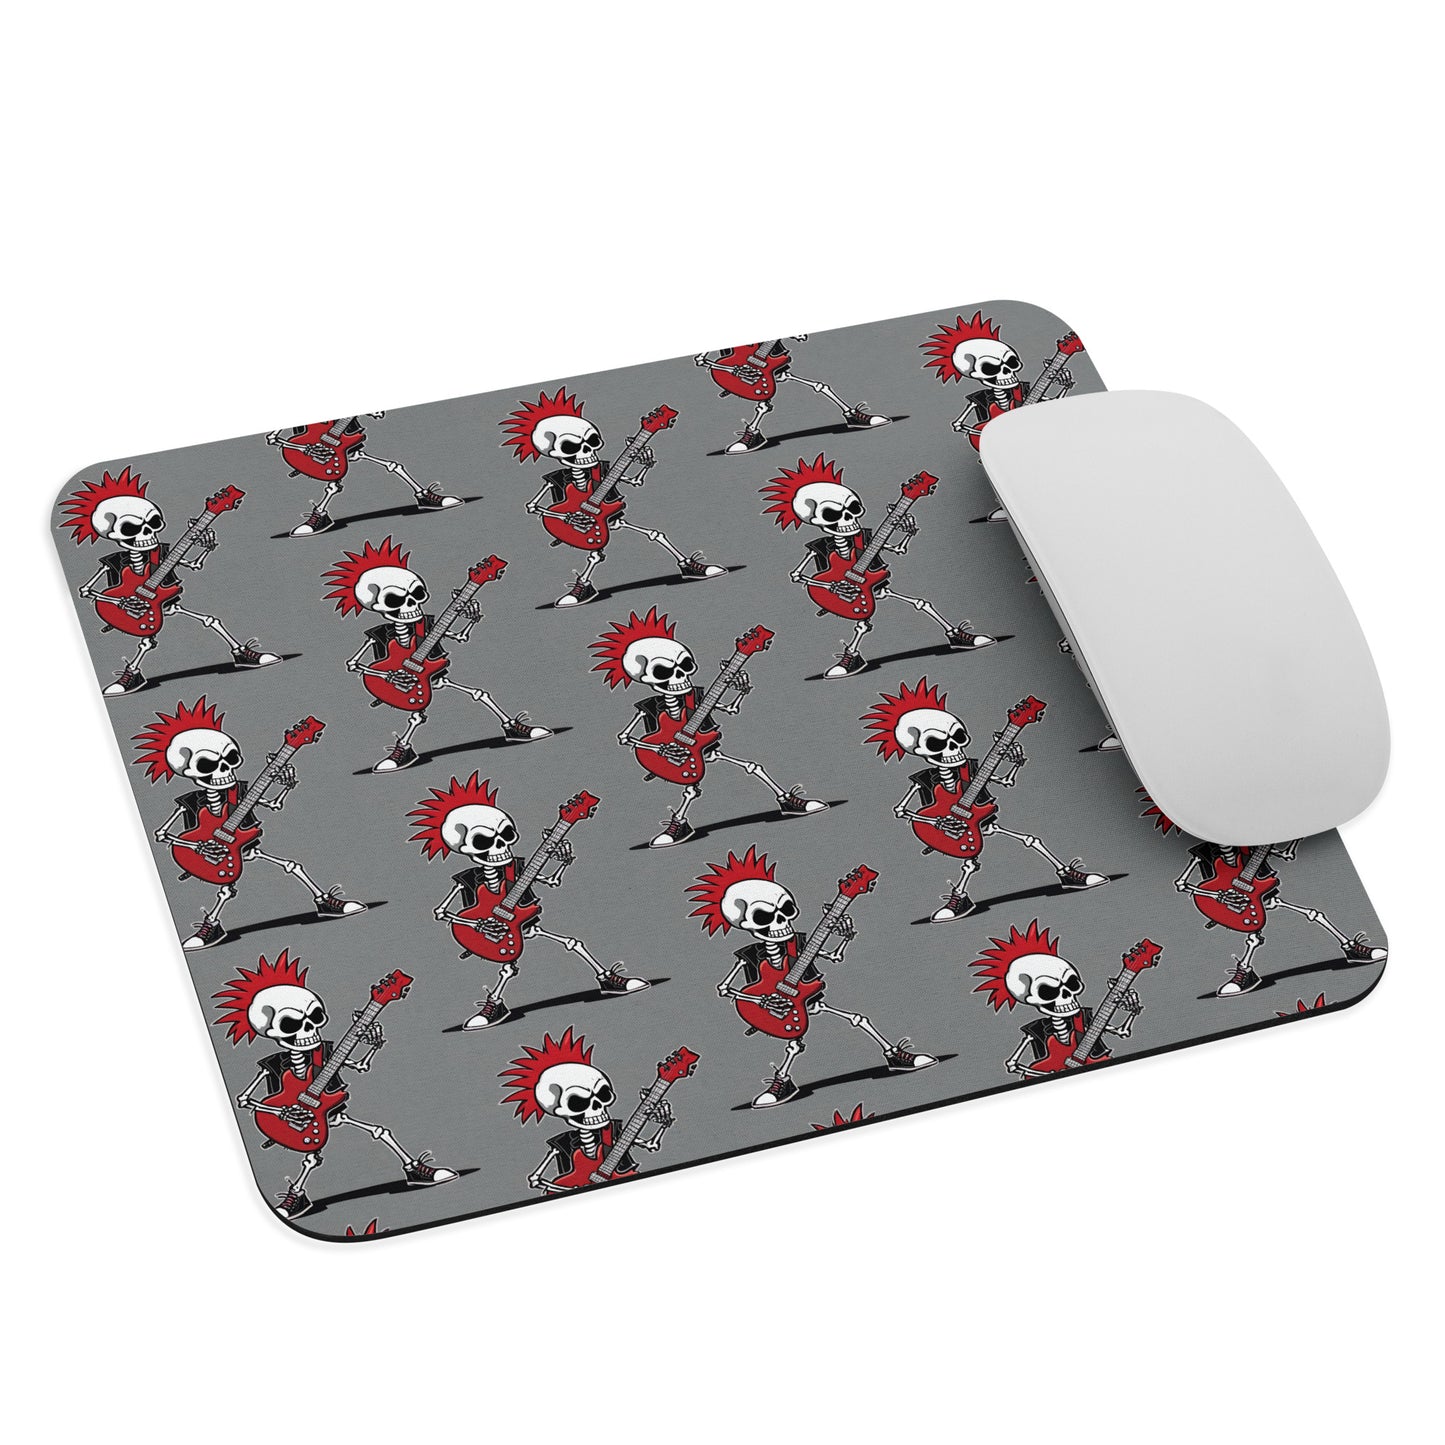 RED'S GUITAR MOUSE PAD